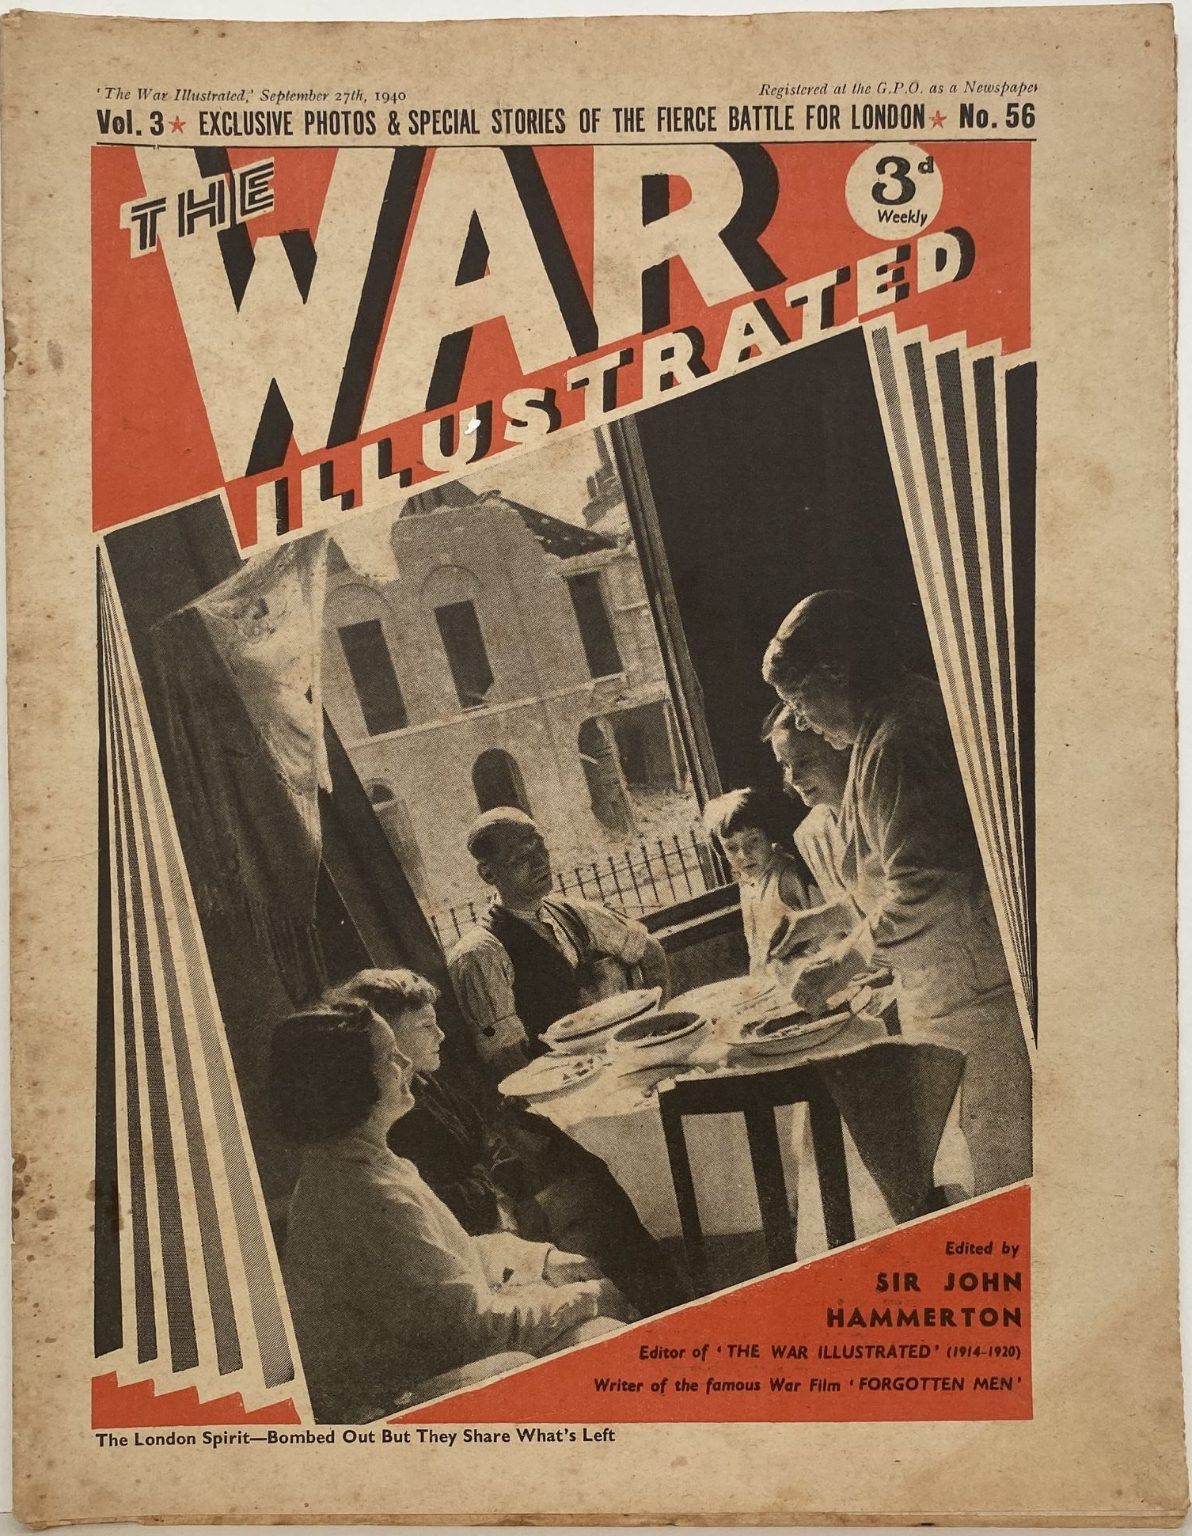 THE WAR ILLUSTRATED - Vol 3, No 56, 27th Sept 1940